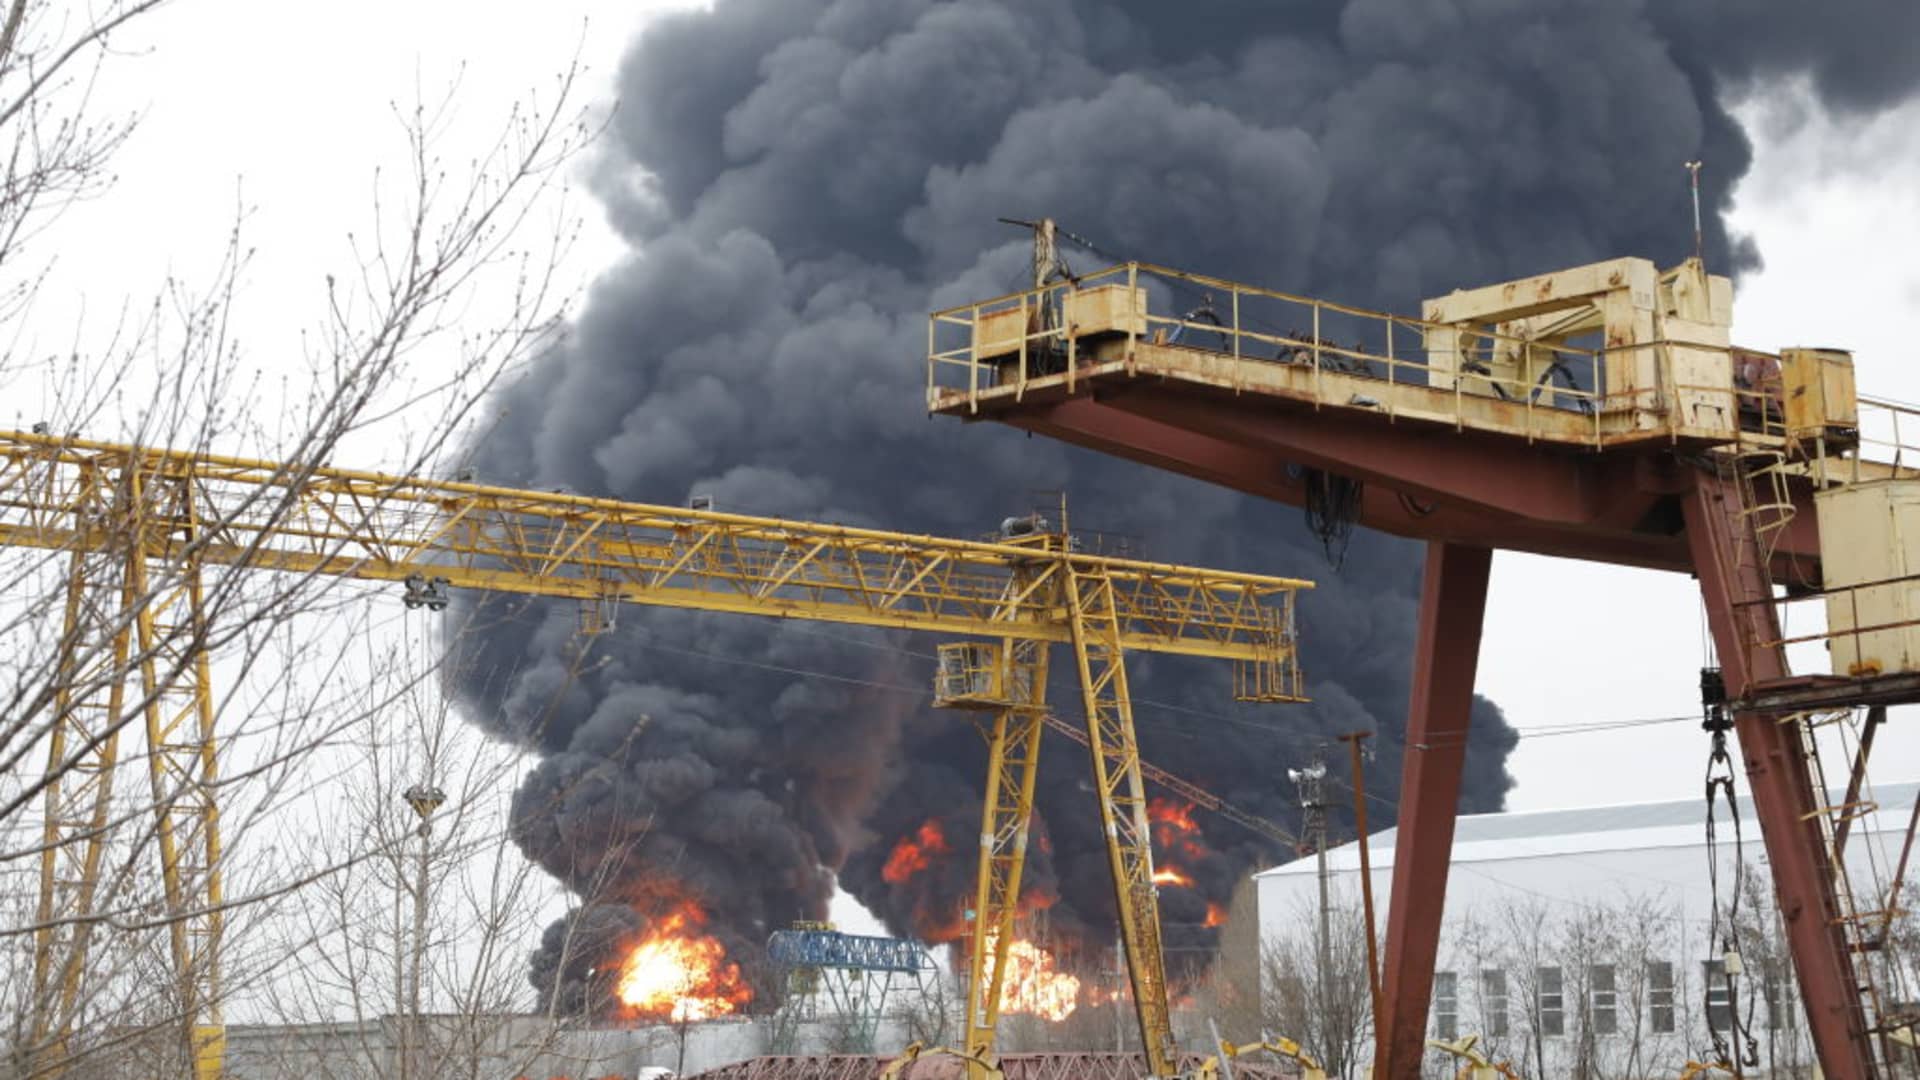 An image of damage after Regional Governor Vyacheslav Gladkov says that helicopters of the Ukrainian Army hit the oil refinery in Belgorod, Russia on April 1, 2022.